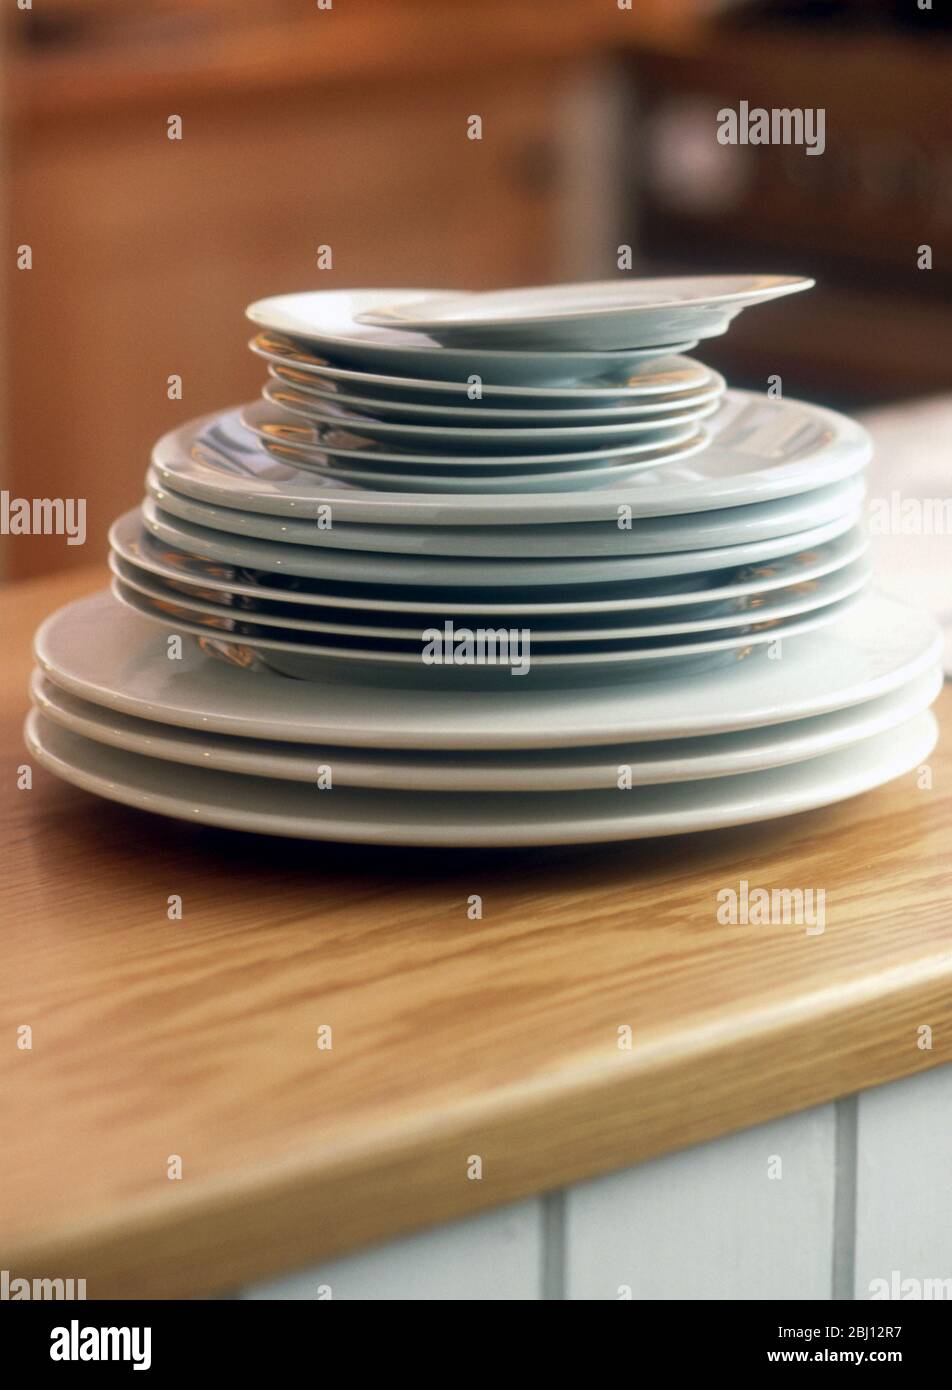 Plates of three different sizes stacked on a worktop - Stock Photo